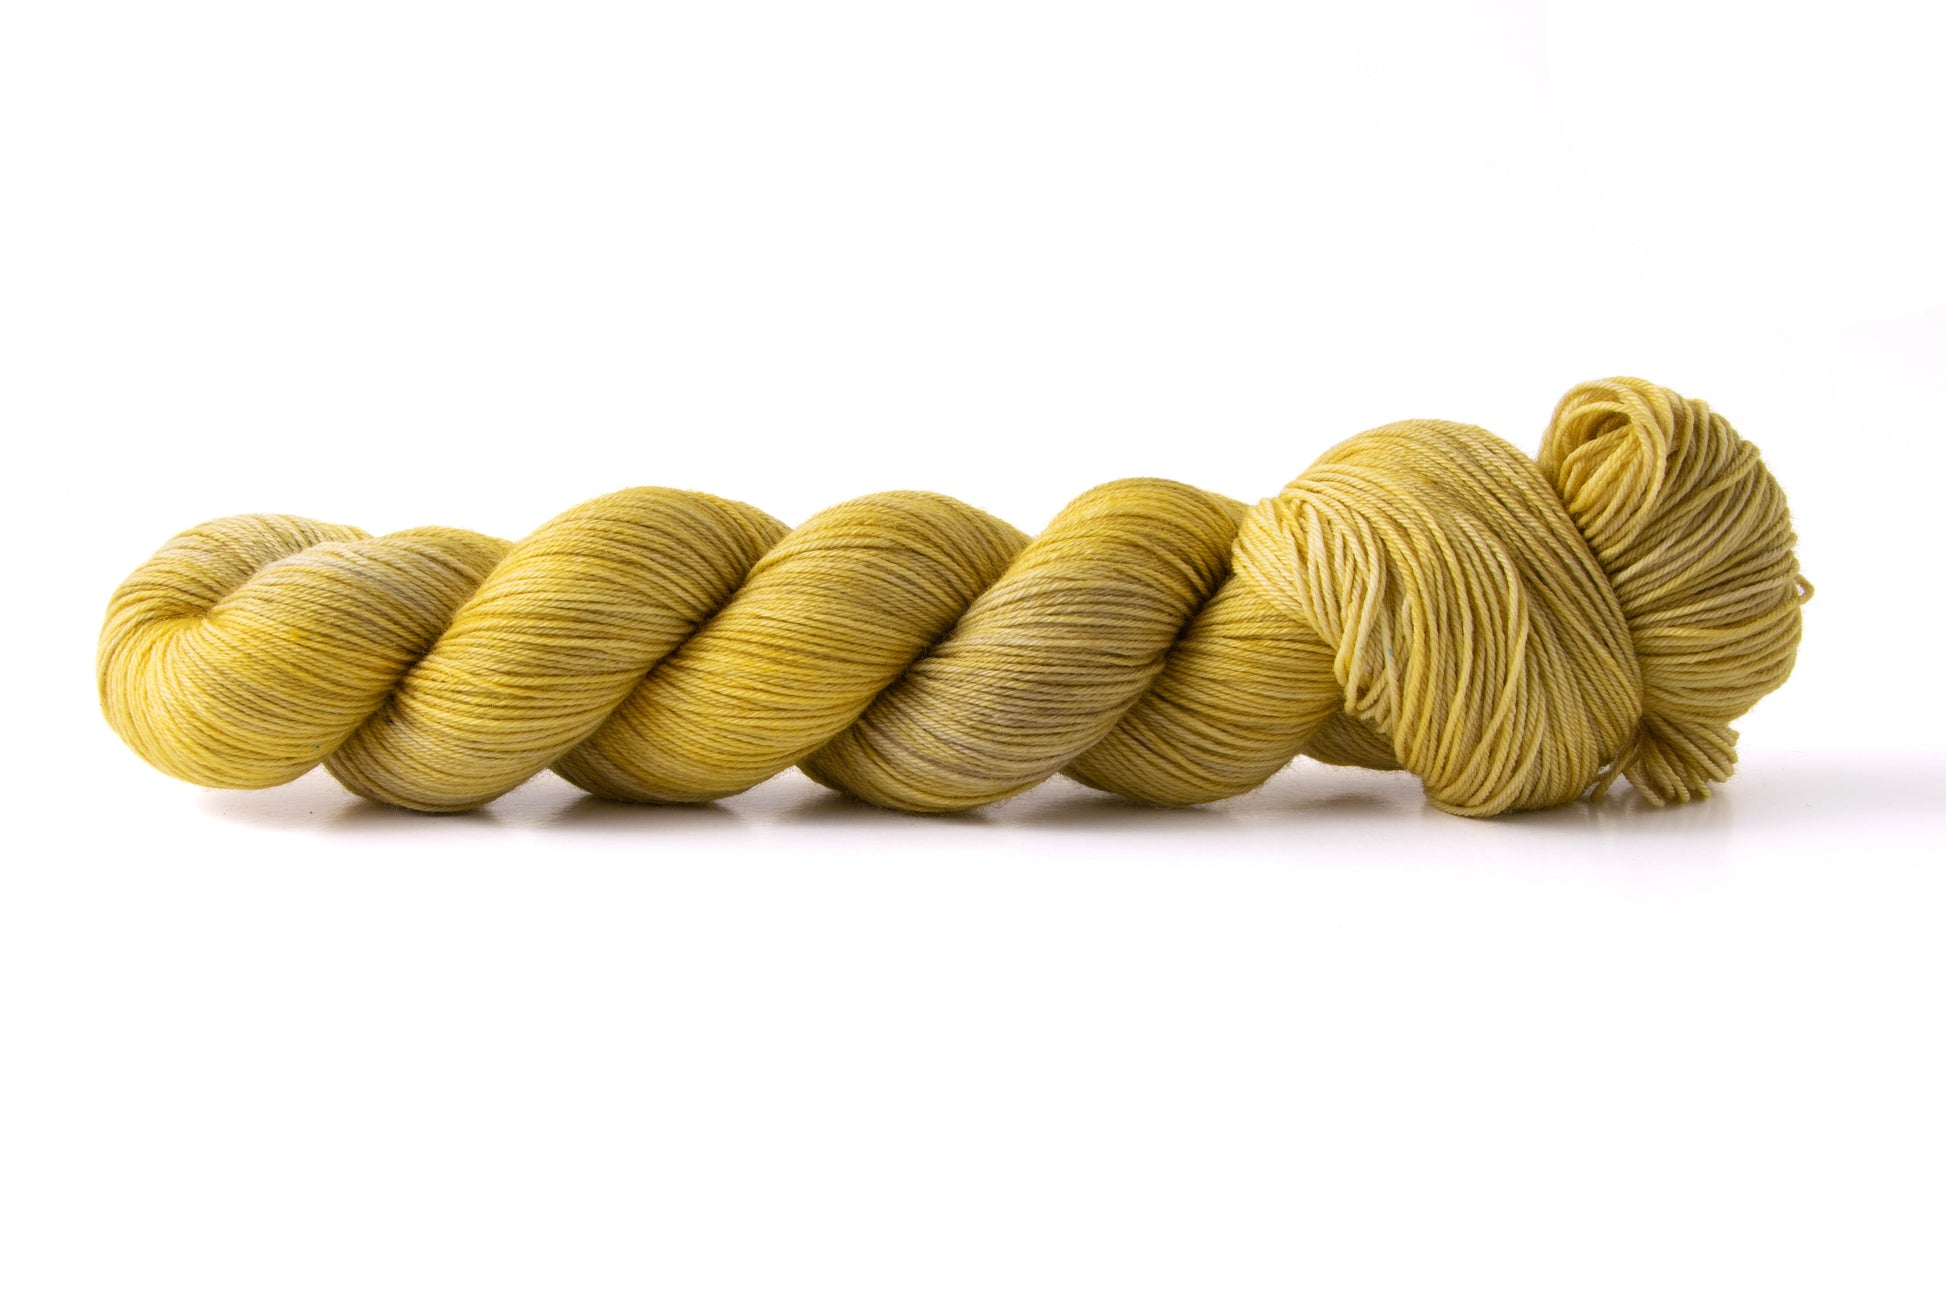 Riptide, a cool-leaning midtoned yellow tonal.